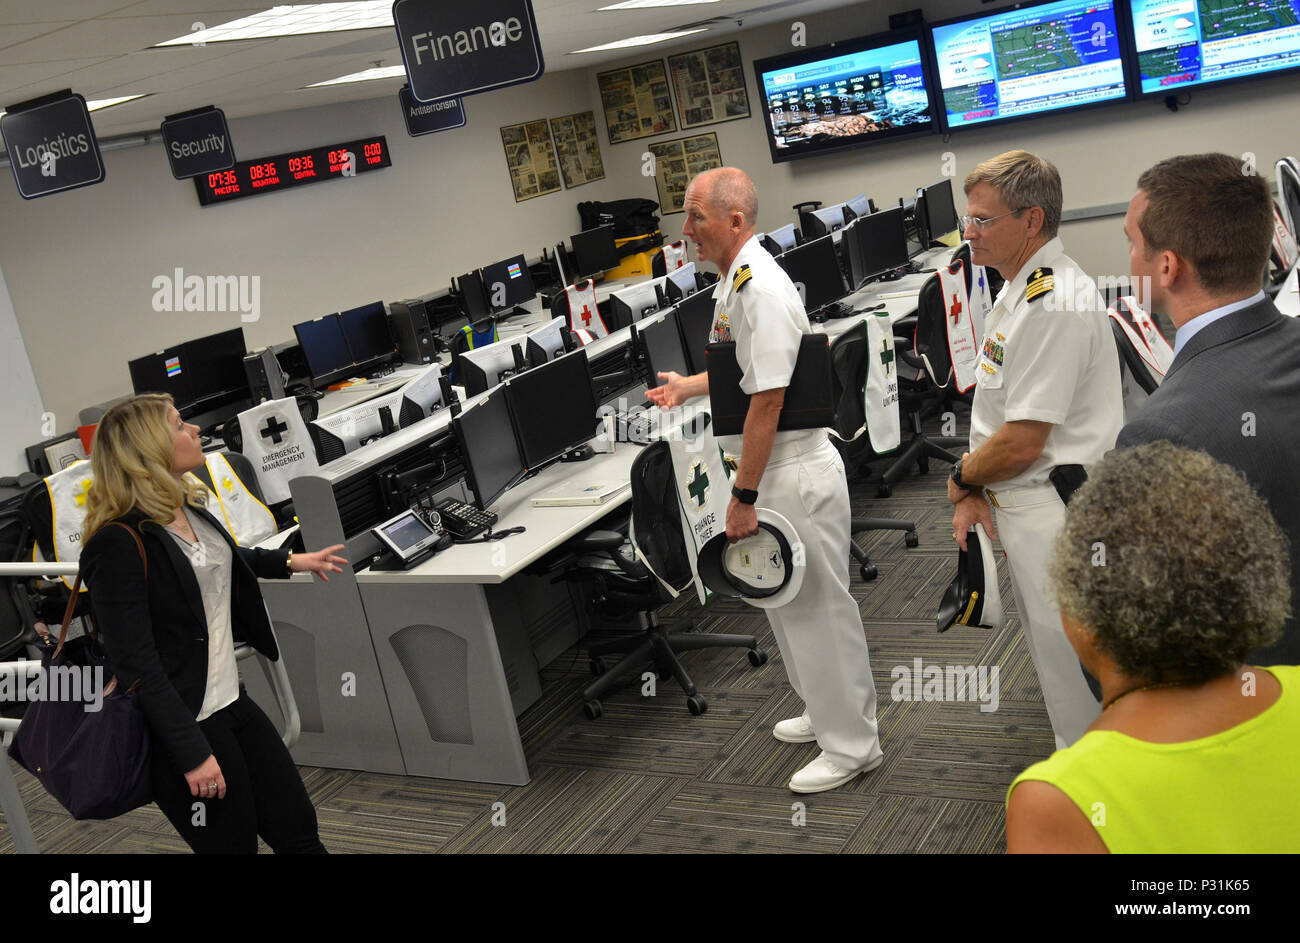 JACKSONVILLE, Fla. (Aug. 17, 2016) – Capt. David Collins, Naval Hospital (NH) Jacksonville commanding officer (center) and Capt. William Todd, executive officer, review the multi-functionality of the hospital’s emergency operations center with Caitlin Poling, national security advisor for Sen. David Perdue of Georgia.  Poling was briefed on regional public health and emergency preparedness.  Poling also toured Navy Region Southeast and Navy Entomology Center of Excellence during her visit to Naval Air Station Jacksonville.  NH Jacksonville's priority since its founding in 1941 is to heal the n Stock Photo